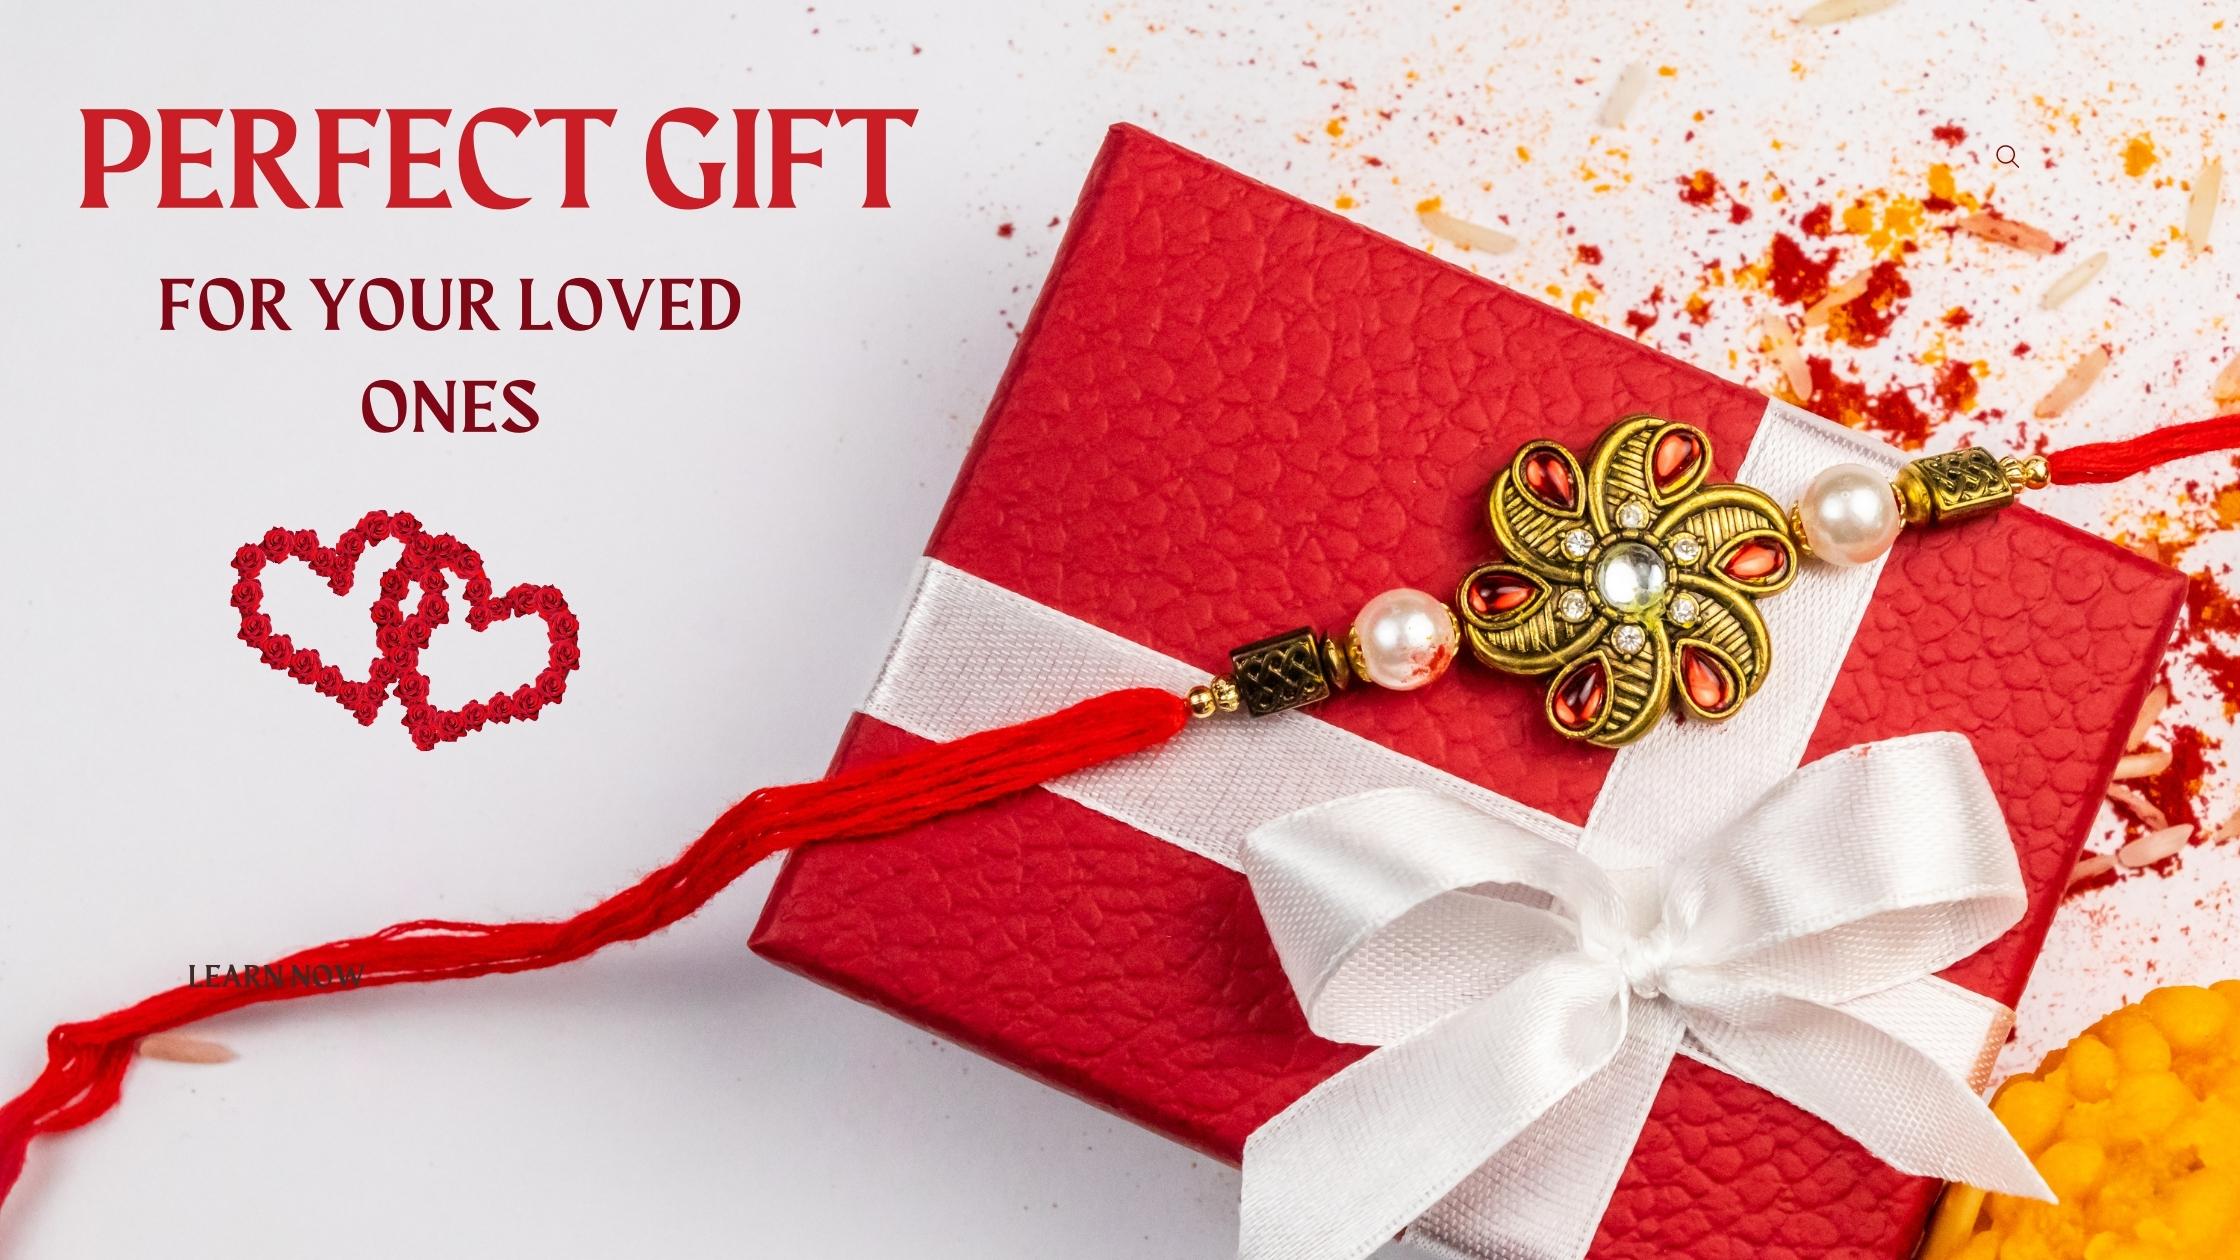 Rakhi Gifts Ideas For Your Loved Ones